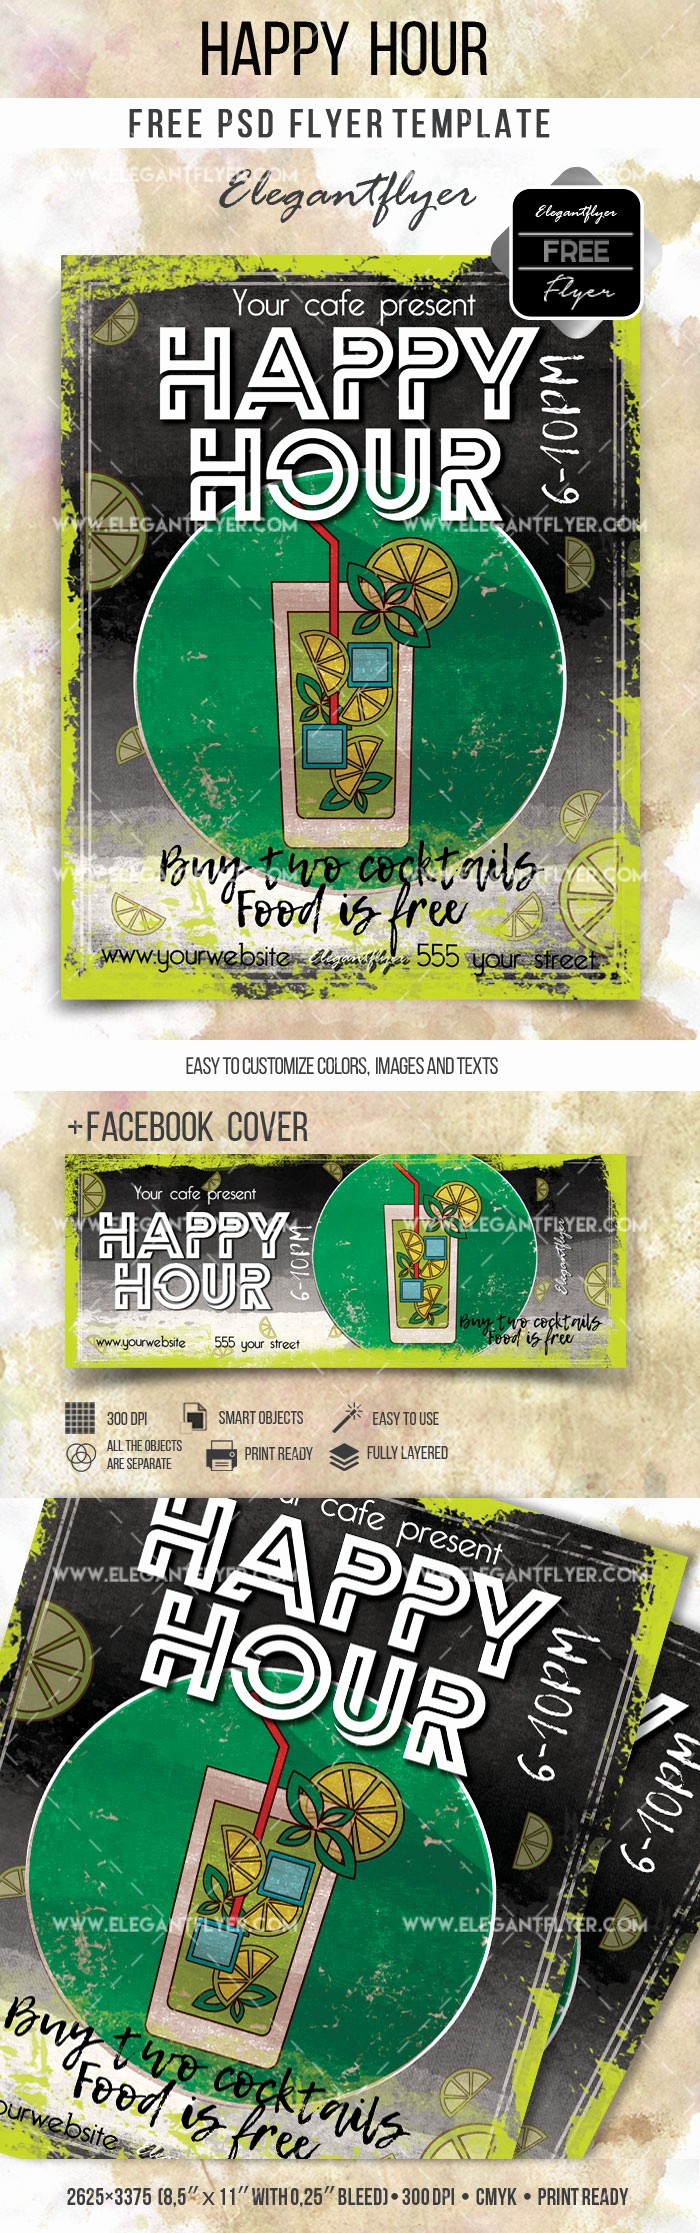 Happy Hour Flyer Template Free Best Of Happy Hour Flyer Free Psd Template – by Elegantflyer